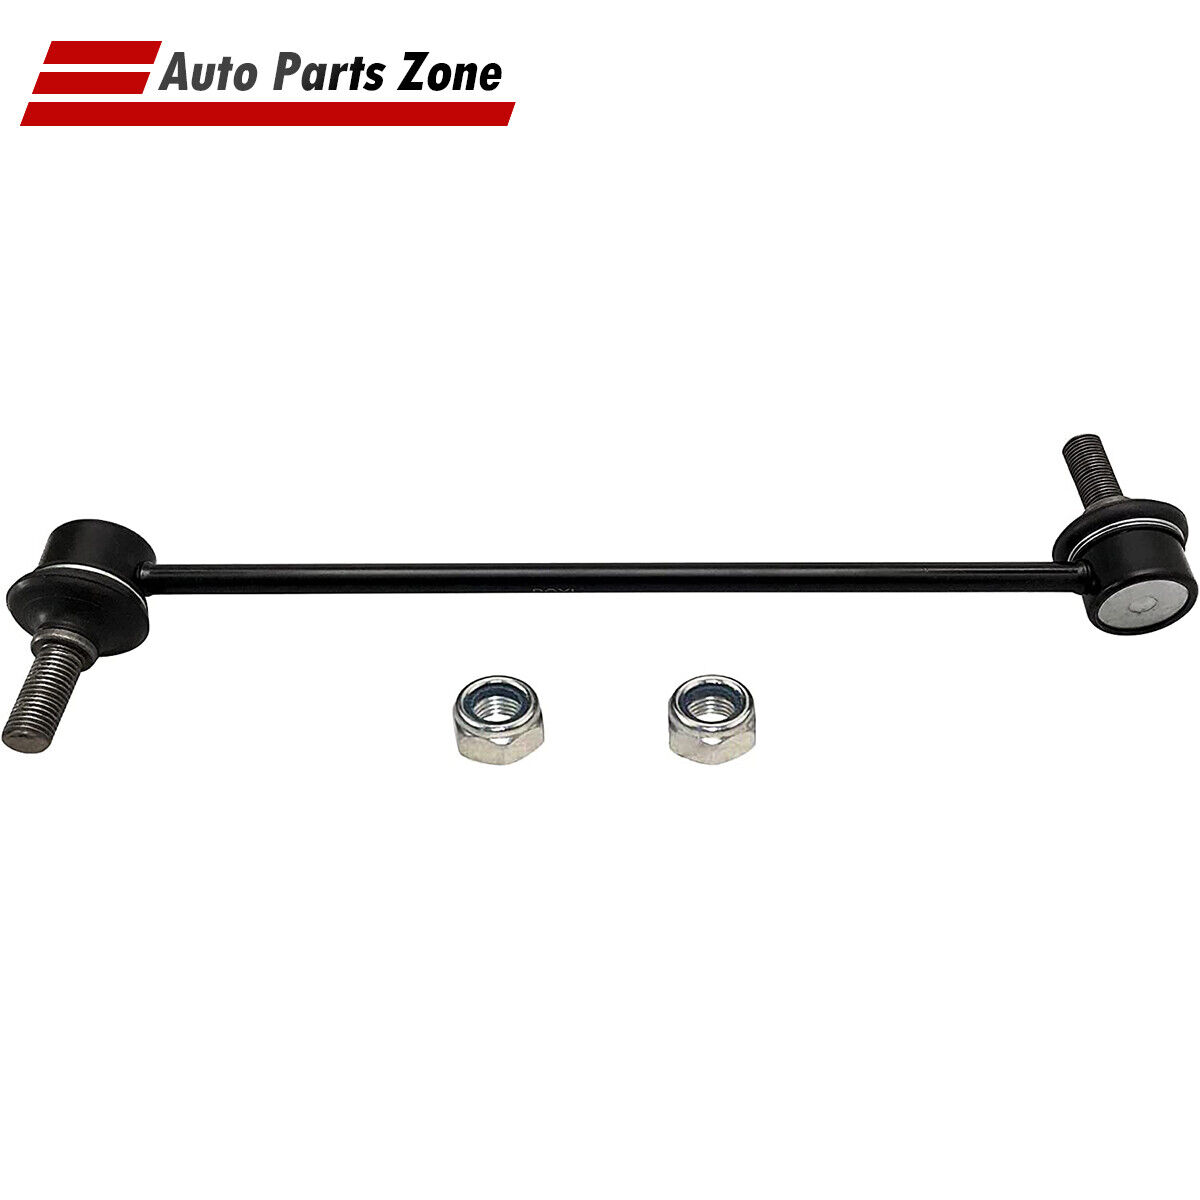 Front Sway Bar Links for 2005 2006 2007 2008 2009 2010-12 Chevy Cobalt Malibu G6